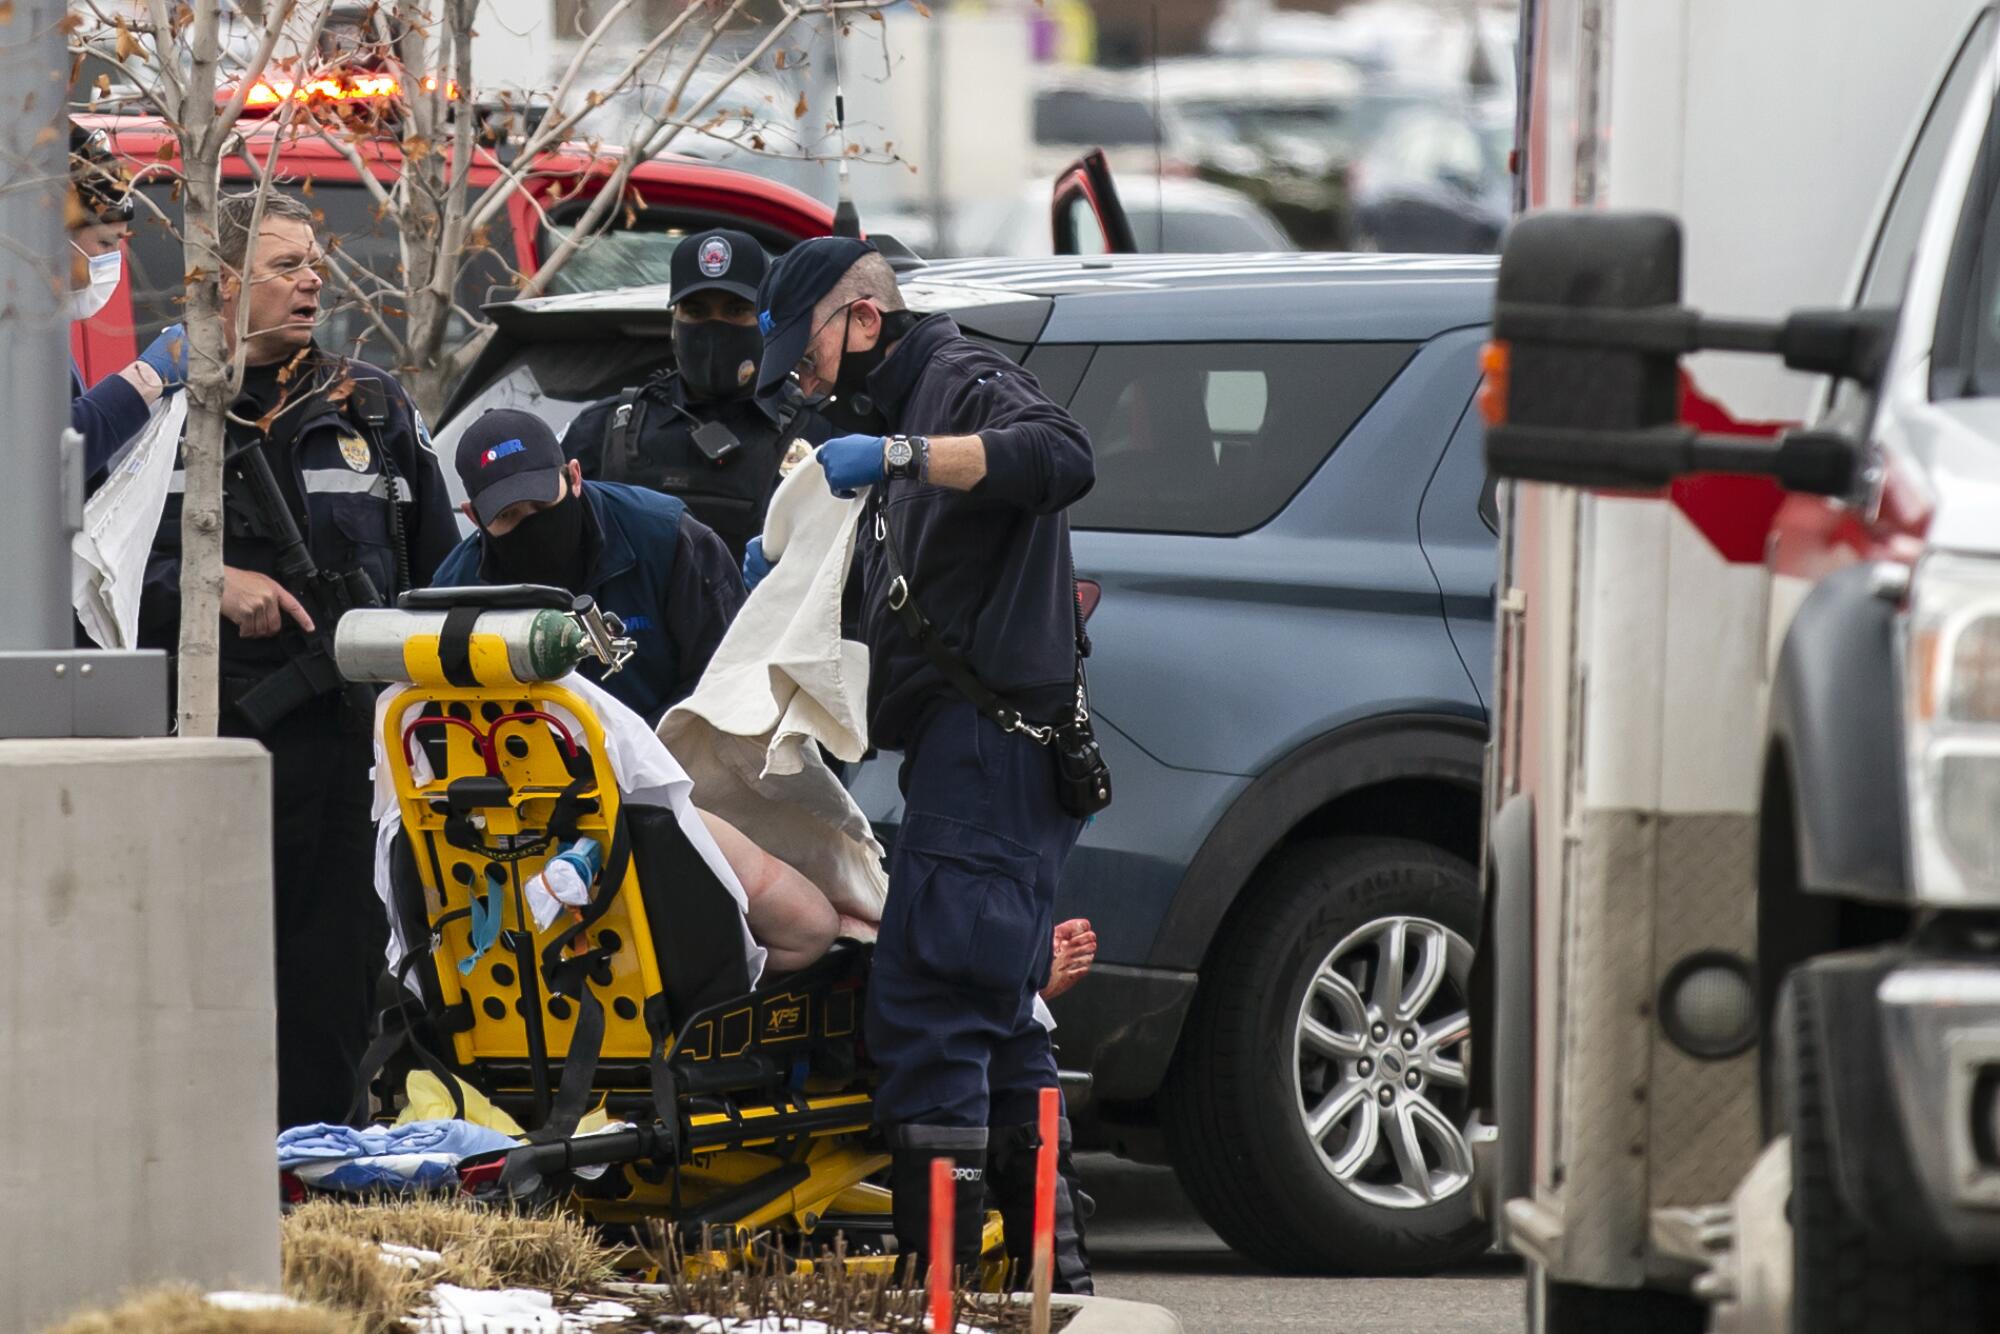 A person is loaded onto a stretcher after a gunman opened fire at a King Sooper's Grocery store on March 22, 2021 in Boulder